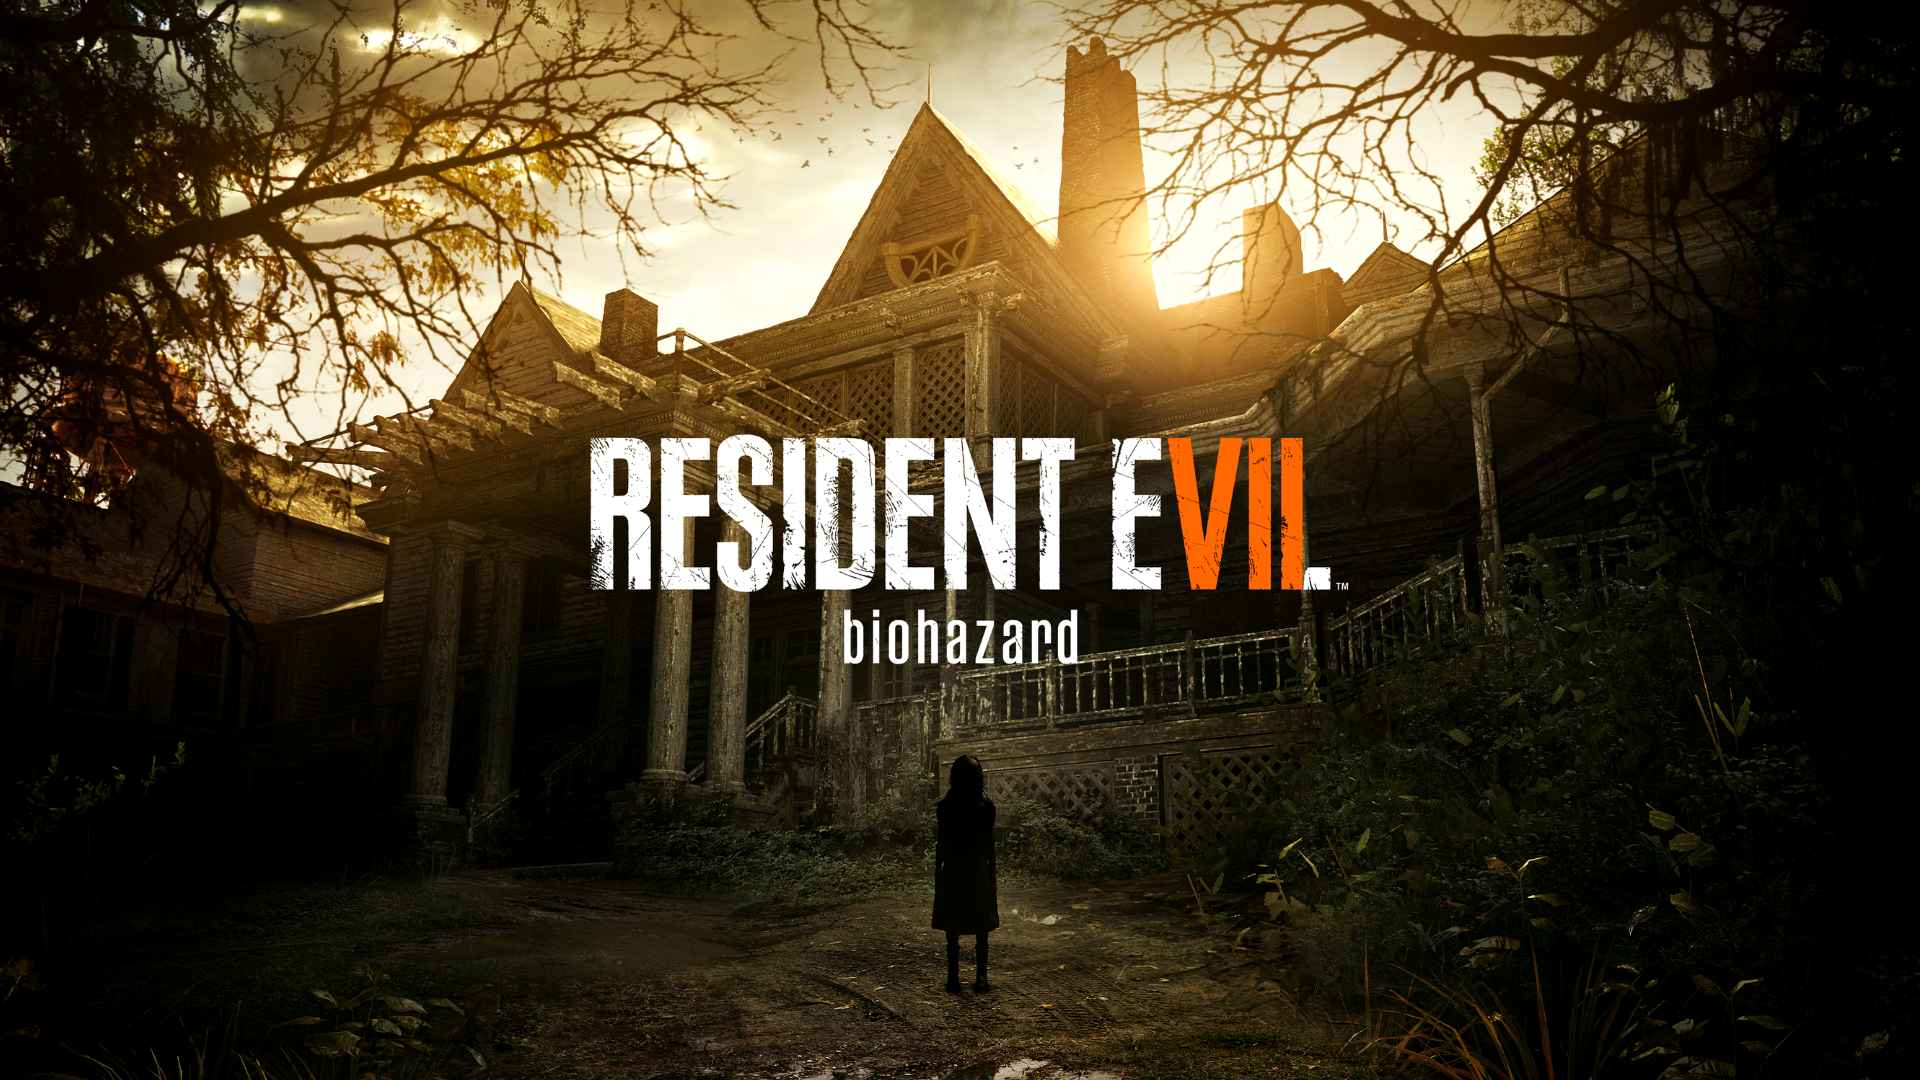 Resident Evil 7 was a new beginning for Capcom's flagship series.